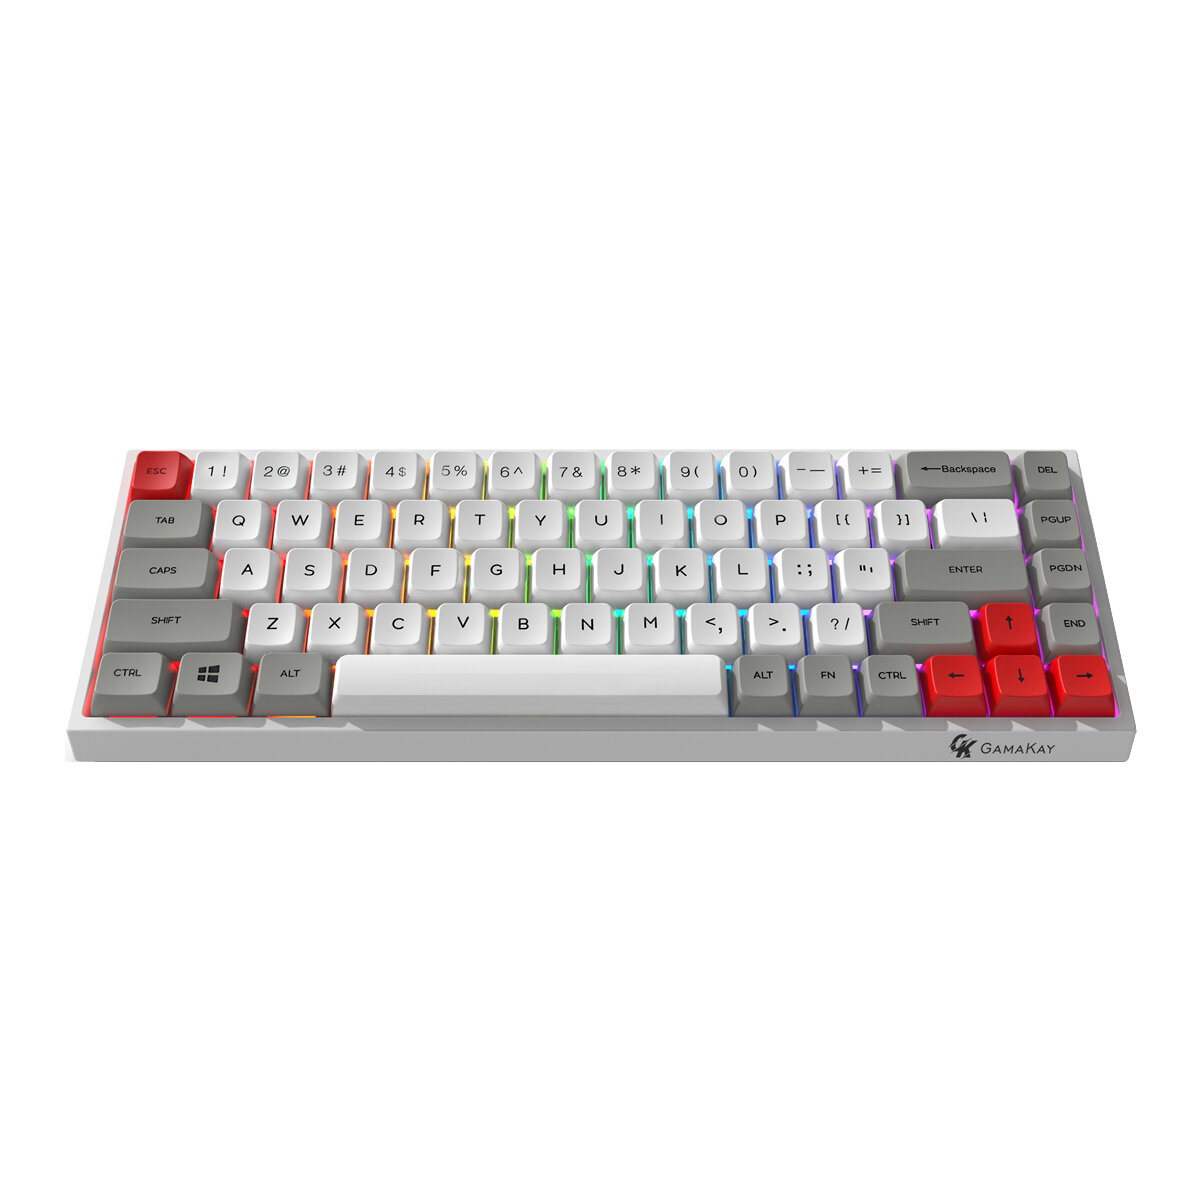 GAMAKAY TK68 Mechanical Keyboard 68 Keys Triple Mode Connection Wired Type-C / BT5.0 / 2.4G Wireless with Receiver Gateron Switch XDA Profile PBT Keycaps Hot Swappable RGB Gaming Keyboard